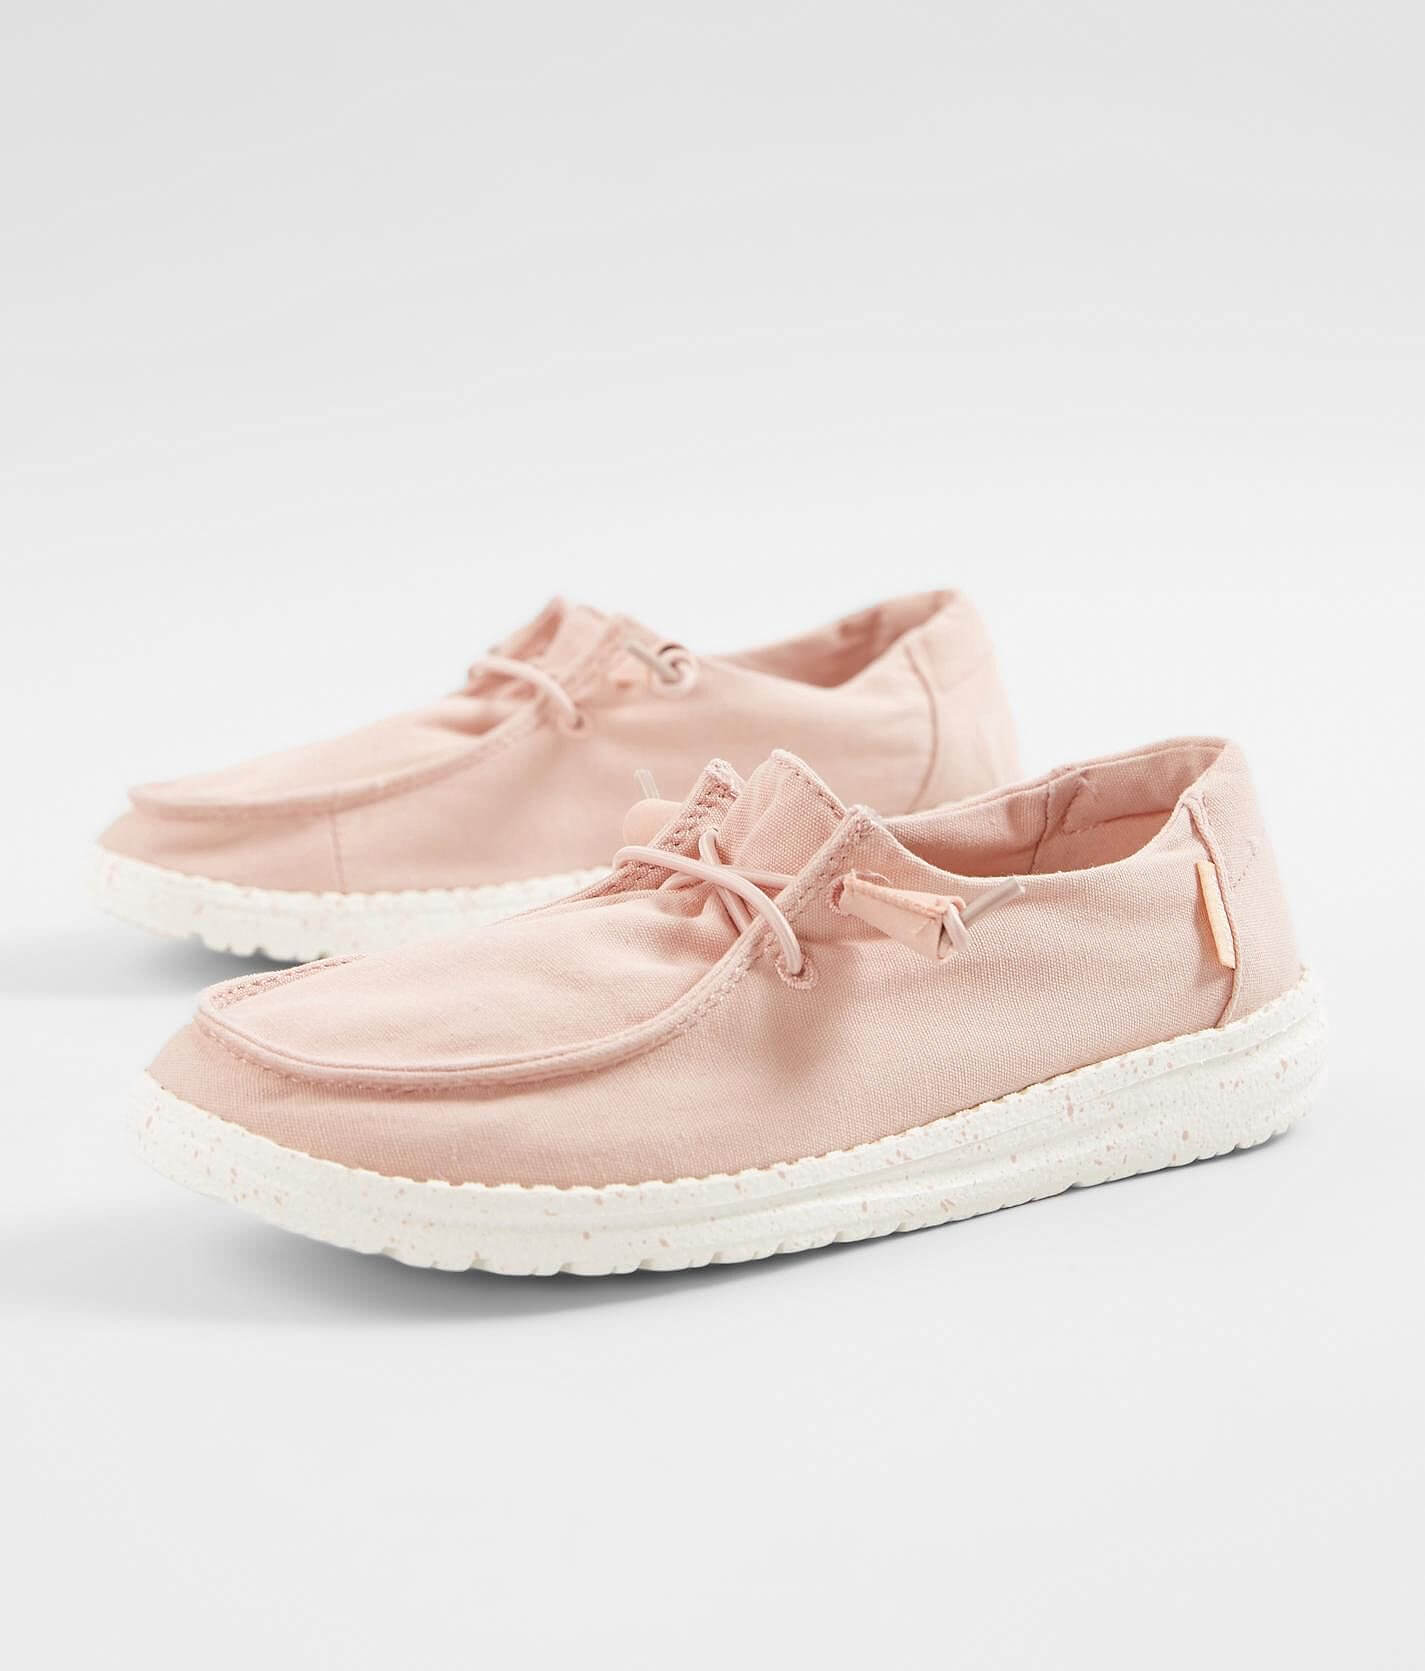 Hey Dude Womens Wendy Antique Rose Size 8 for sale online